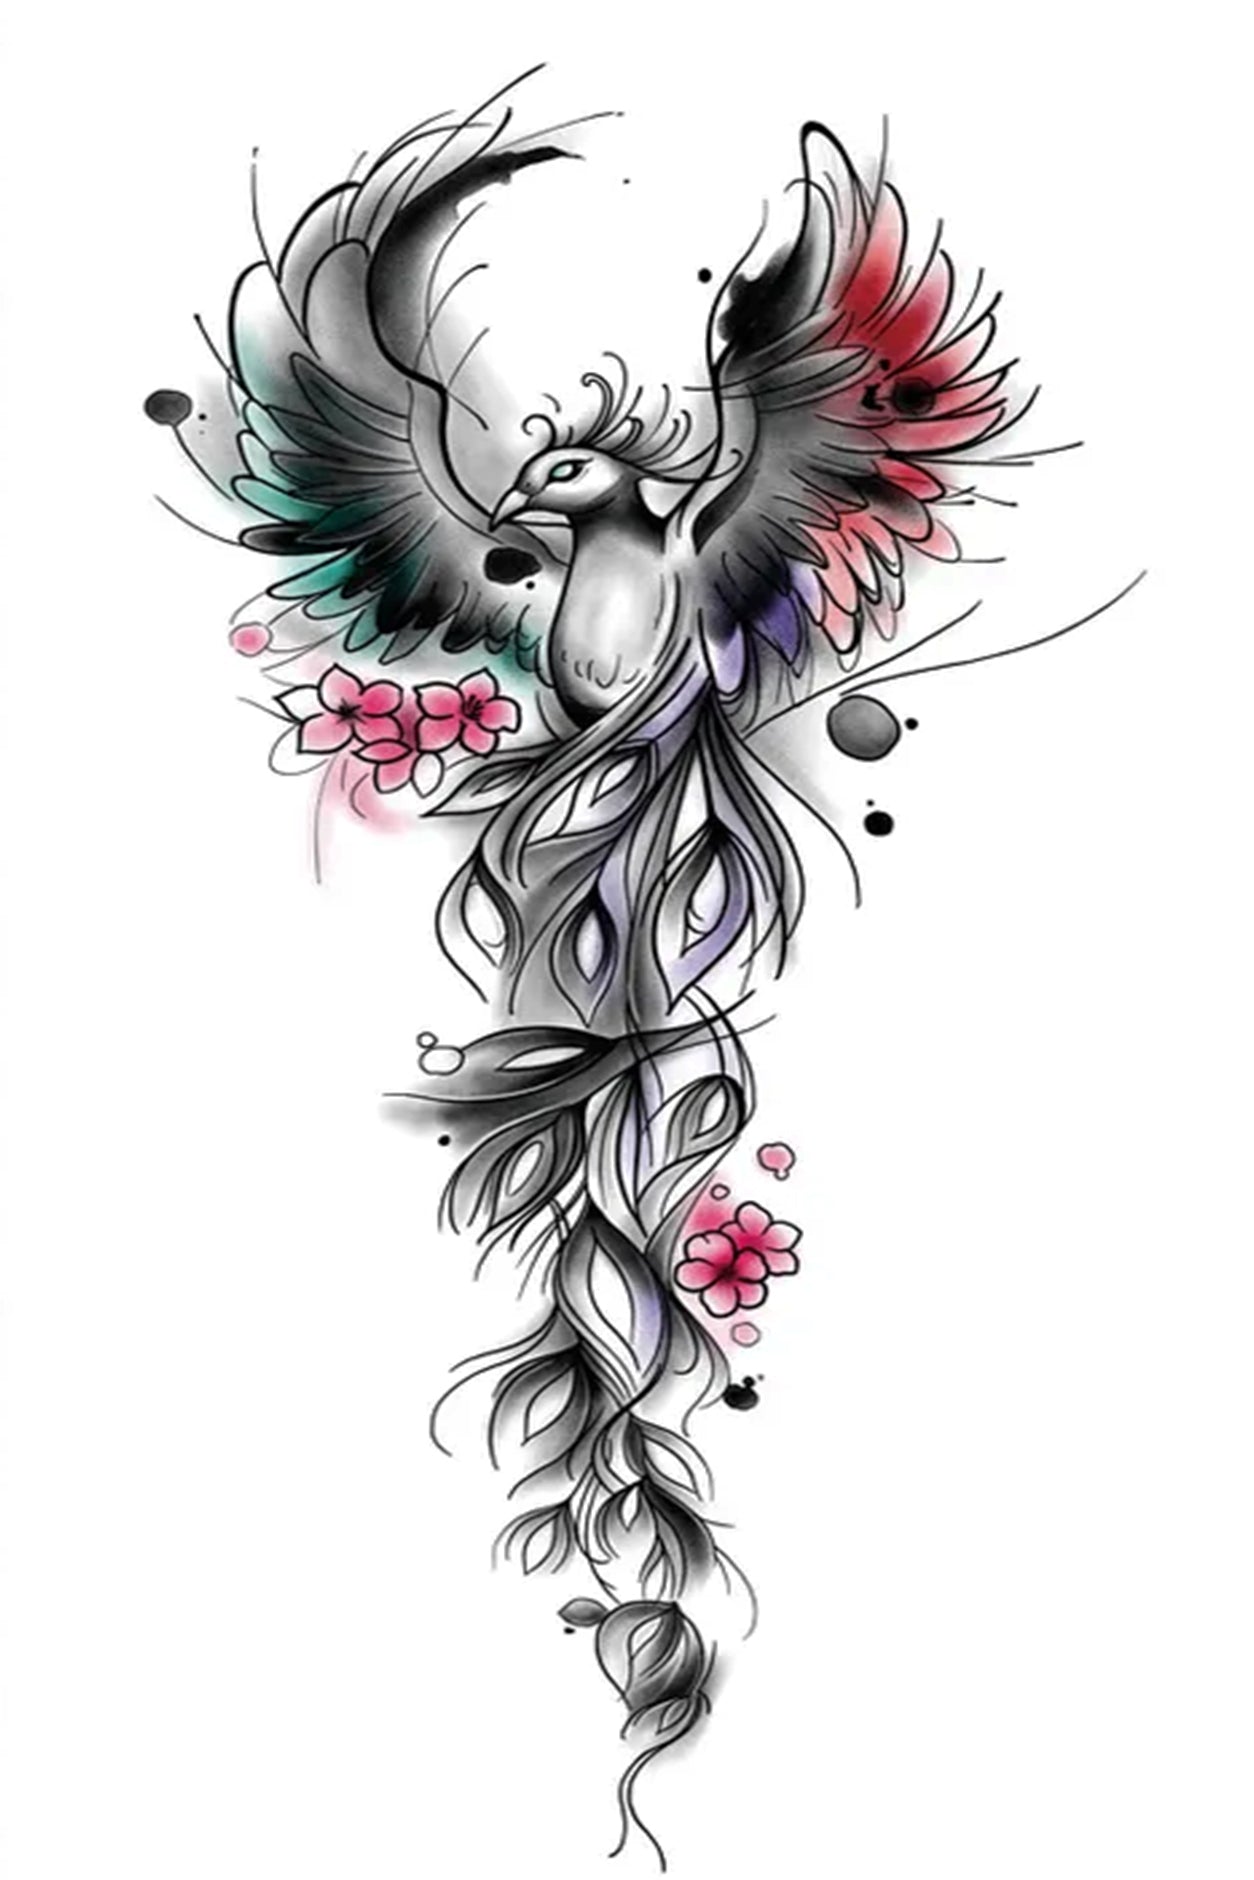 This soft feather phoenix is taking flight with small pink flowers attached. Traditionally the phoenix is an immortal bird always rising from the ashes. The is a beautiful image with delicate pink flowers and pink and pale teal colors lightly added. Creatively wear this artwork on any part of your body, arm, leg, torso, or shoulder.